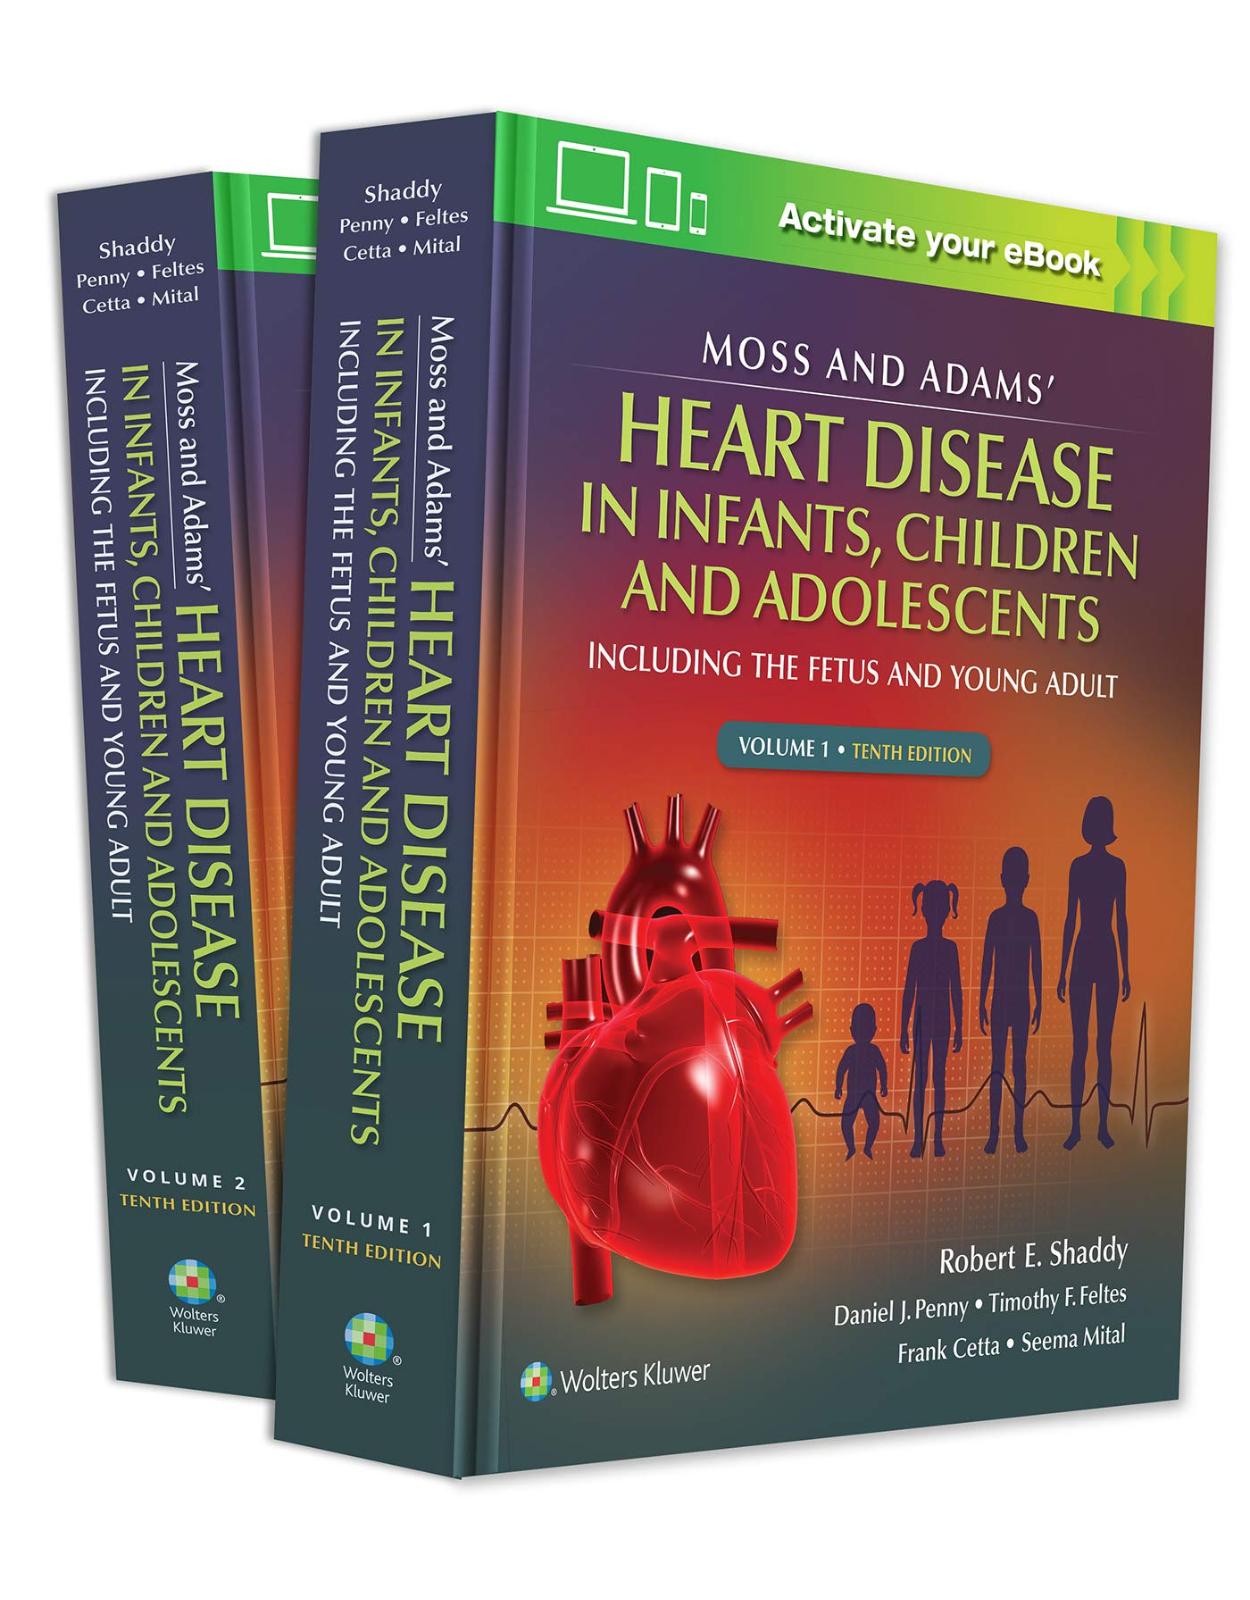 Moss & Adams’ Heart Disease in infants, Children, and Adolescents: Including the Fetus and Young Adult